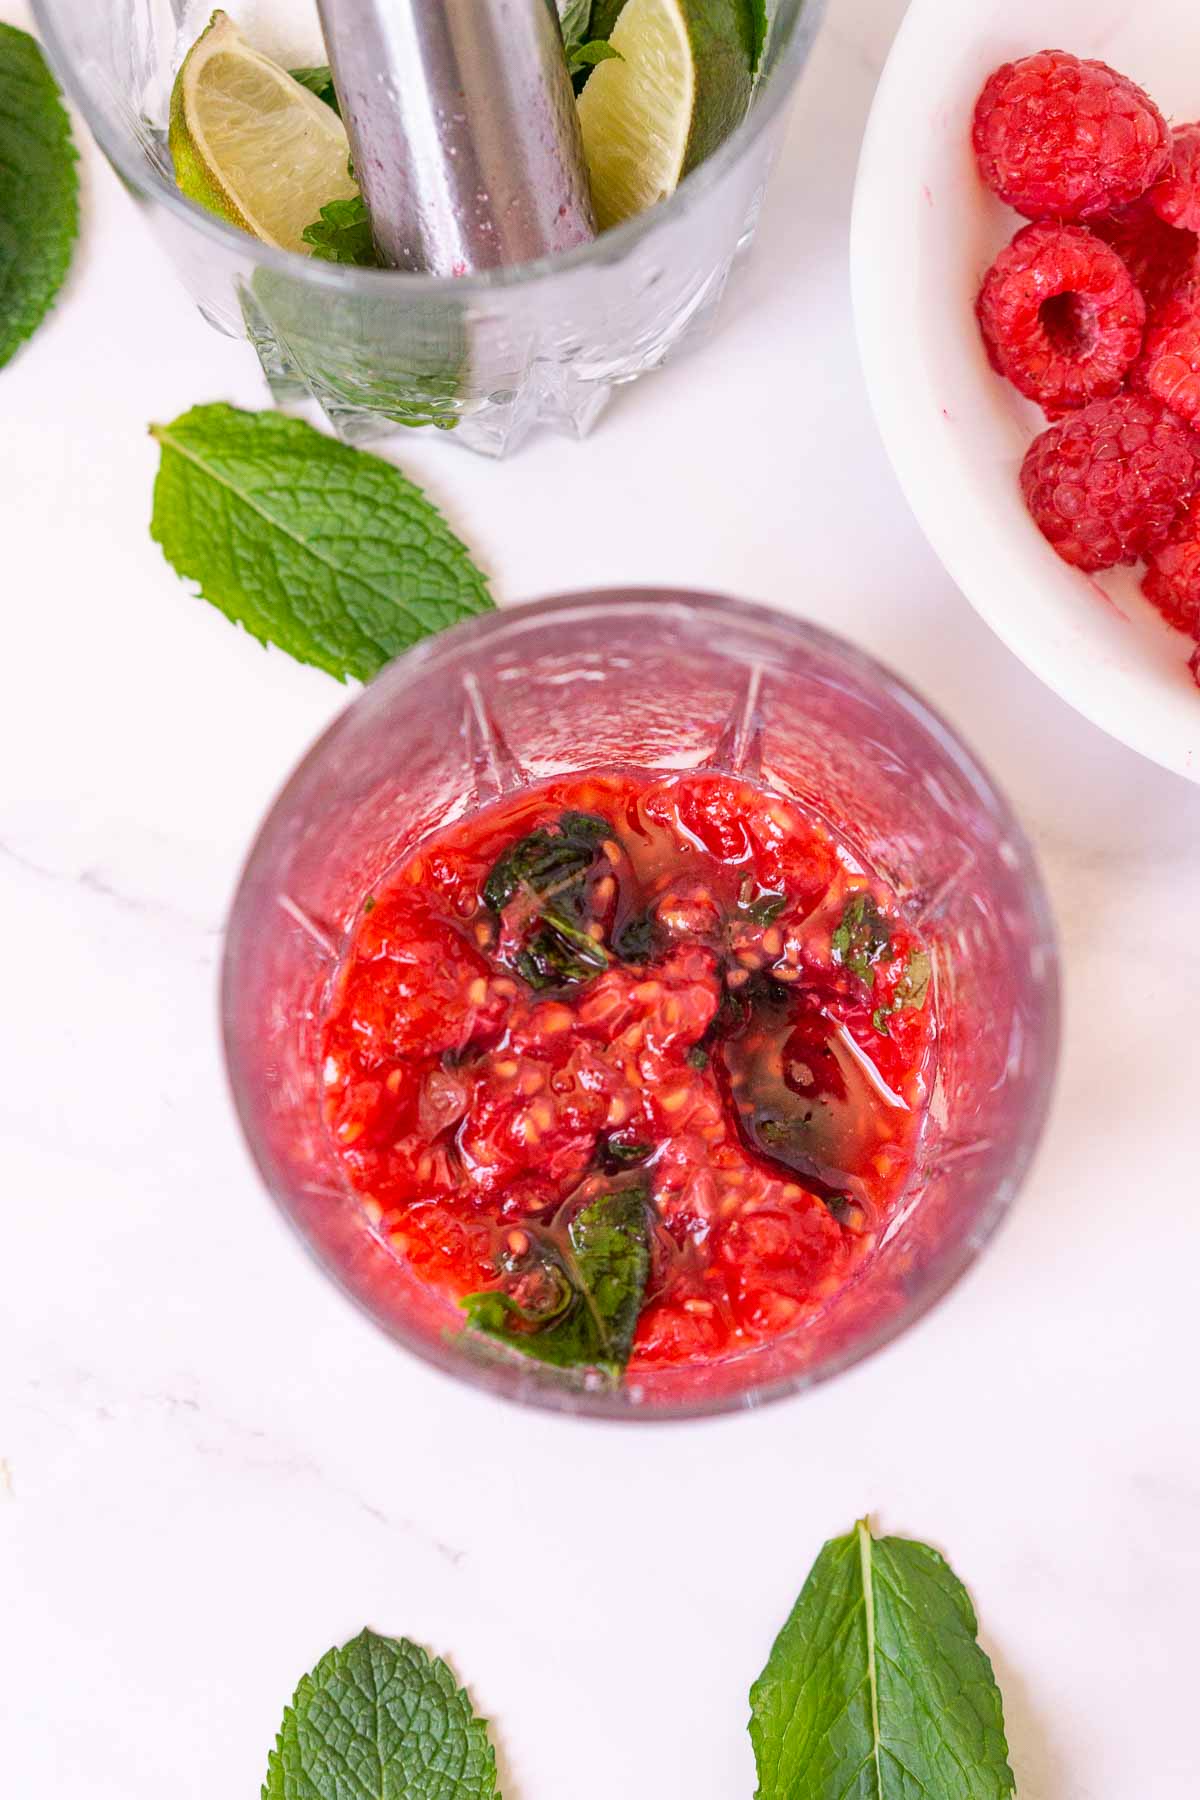 Muddled raspberries and mint in a glass